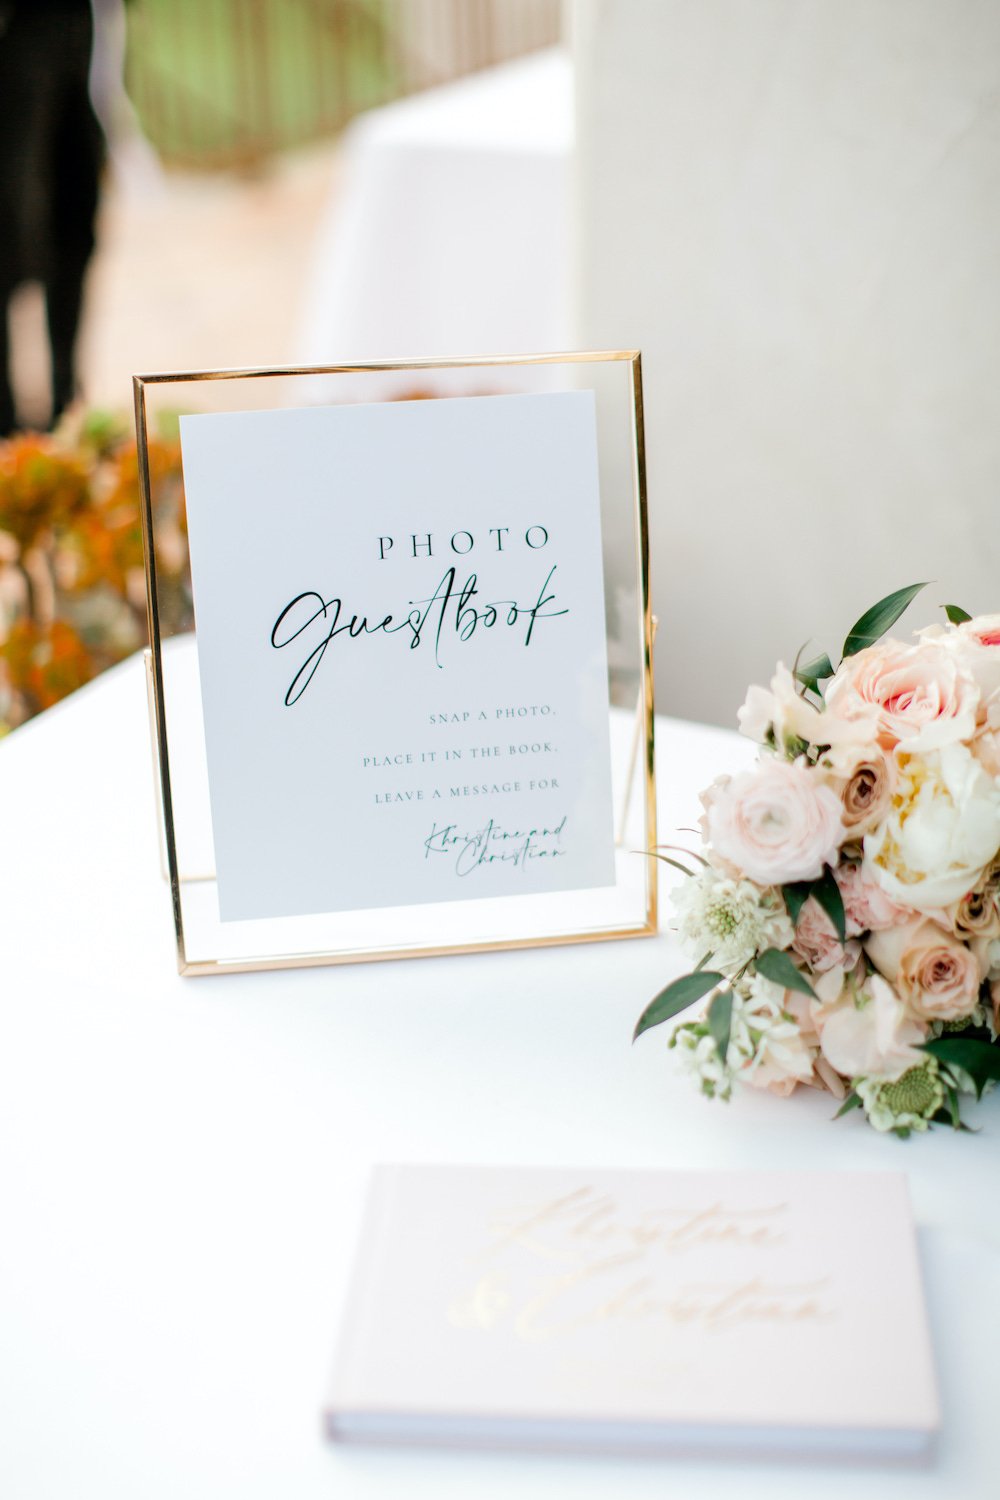 Photo guestbook sign in a gold frame.